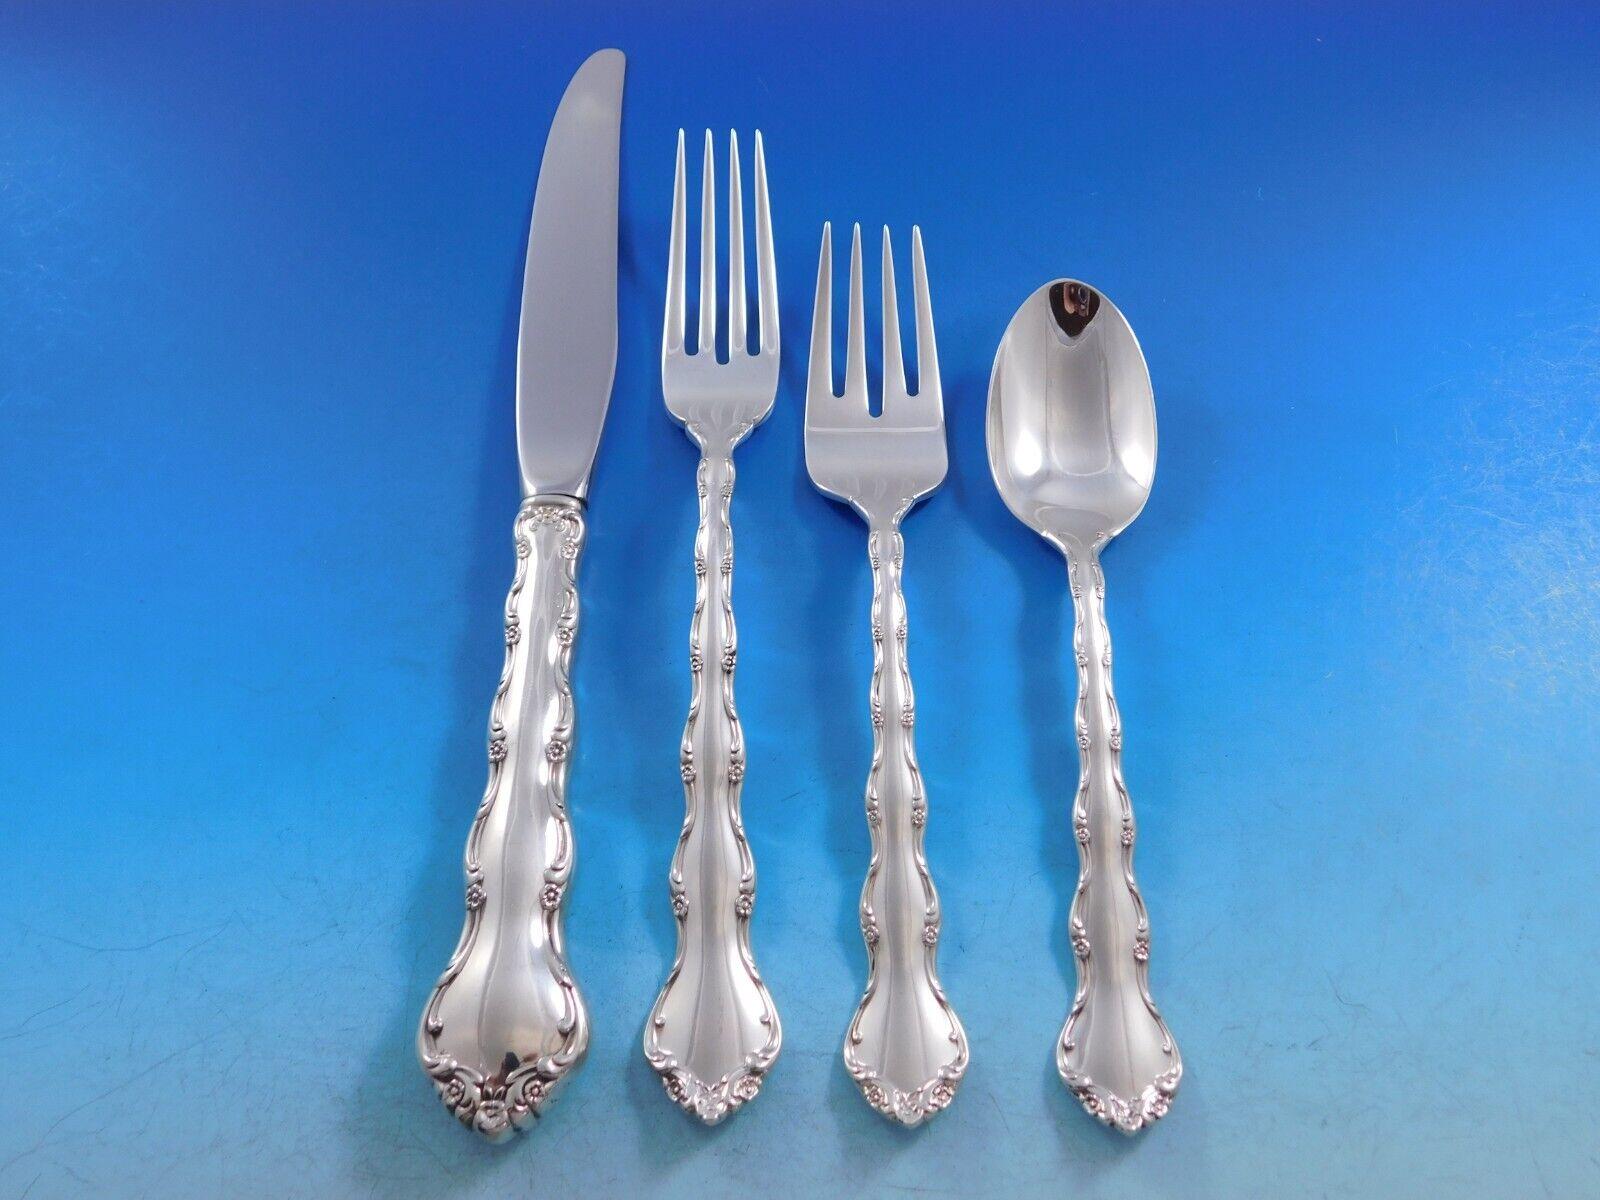 Tara by Reed and Barton Sterling Silver Flatware Set For 8 Service 49 Pieces In Excellent Condition For Sale In Big Bend, WI